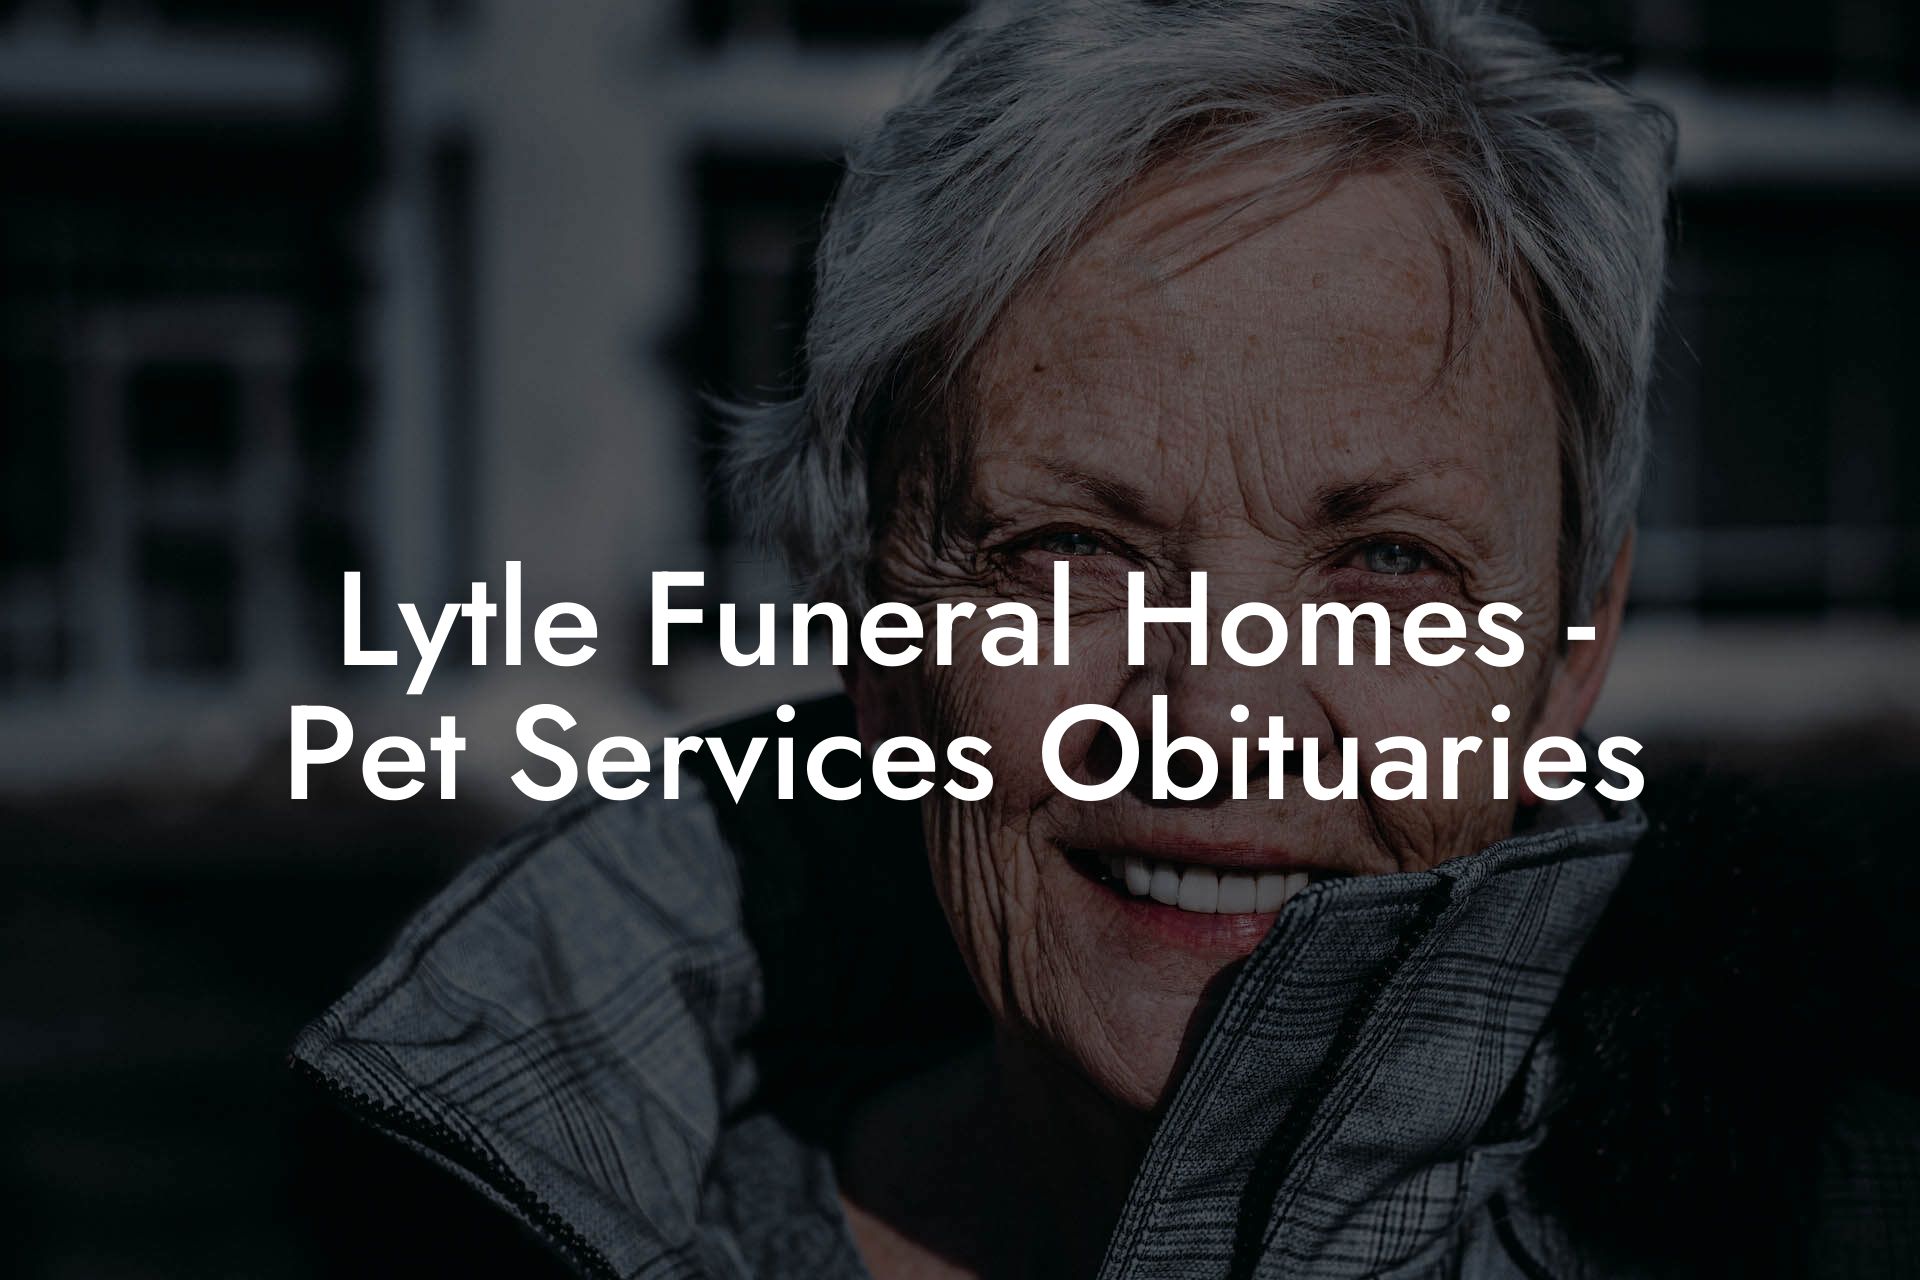 Lytle Funeral Homes - Pet Services Obituaries